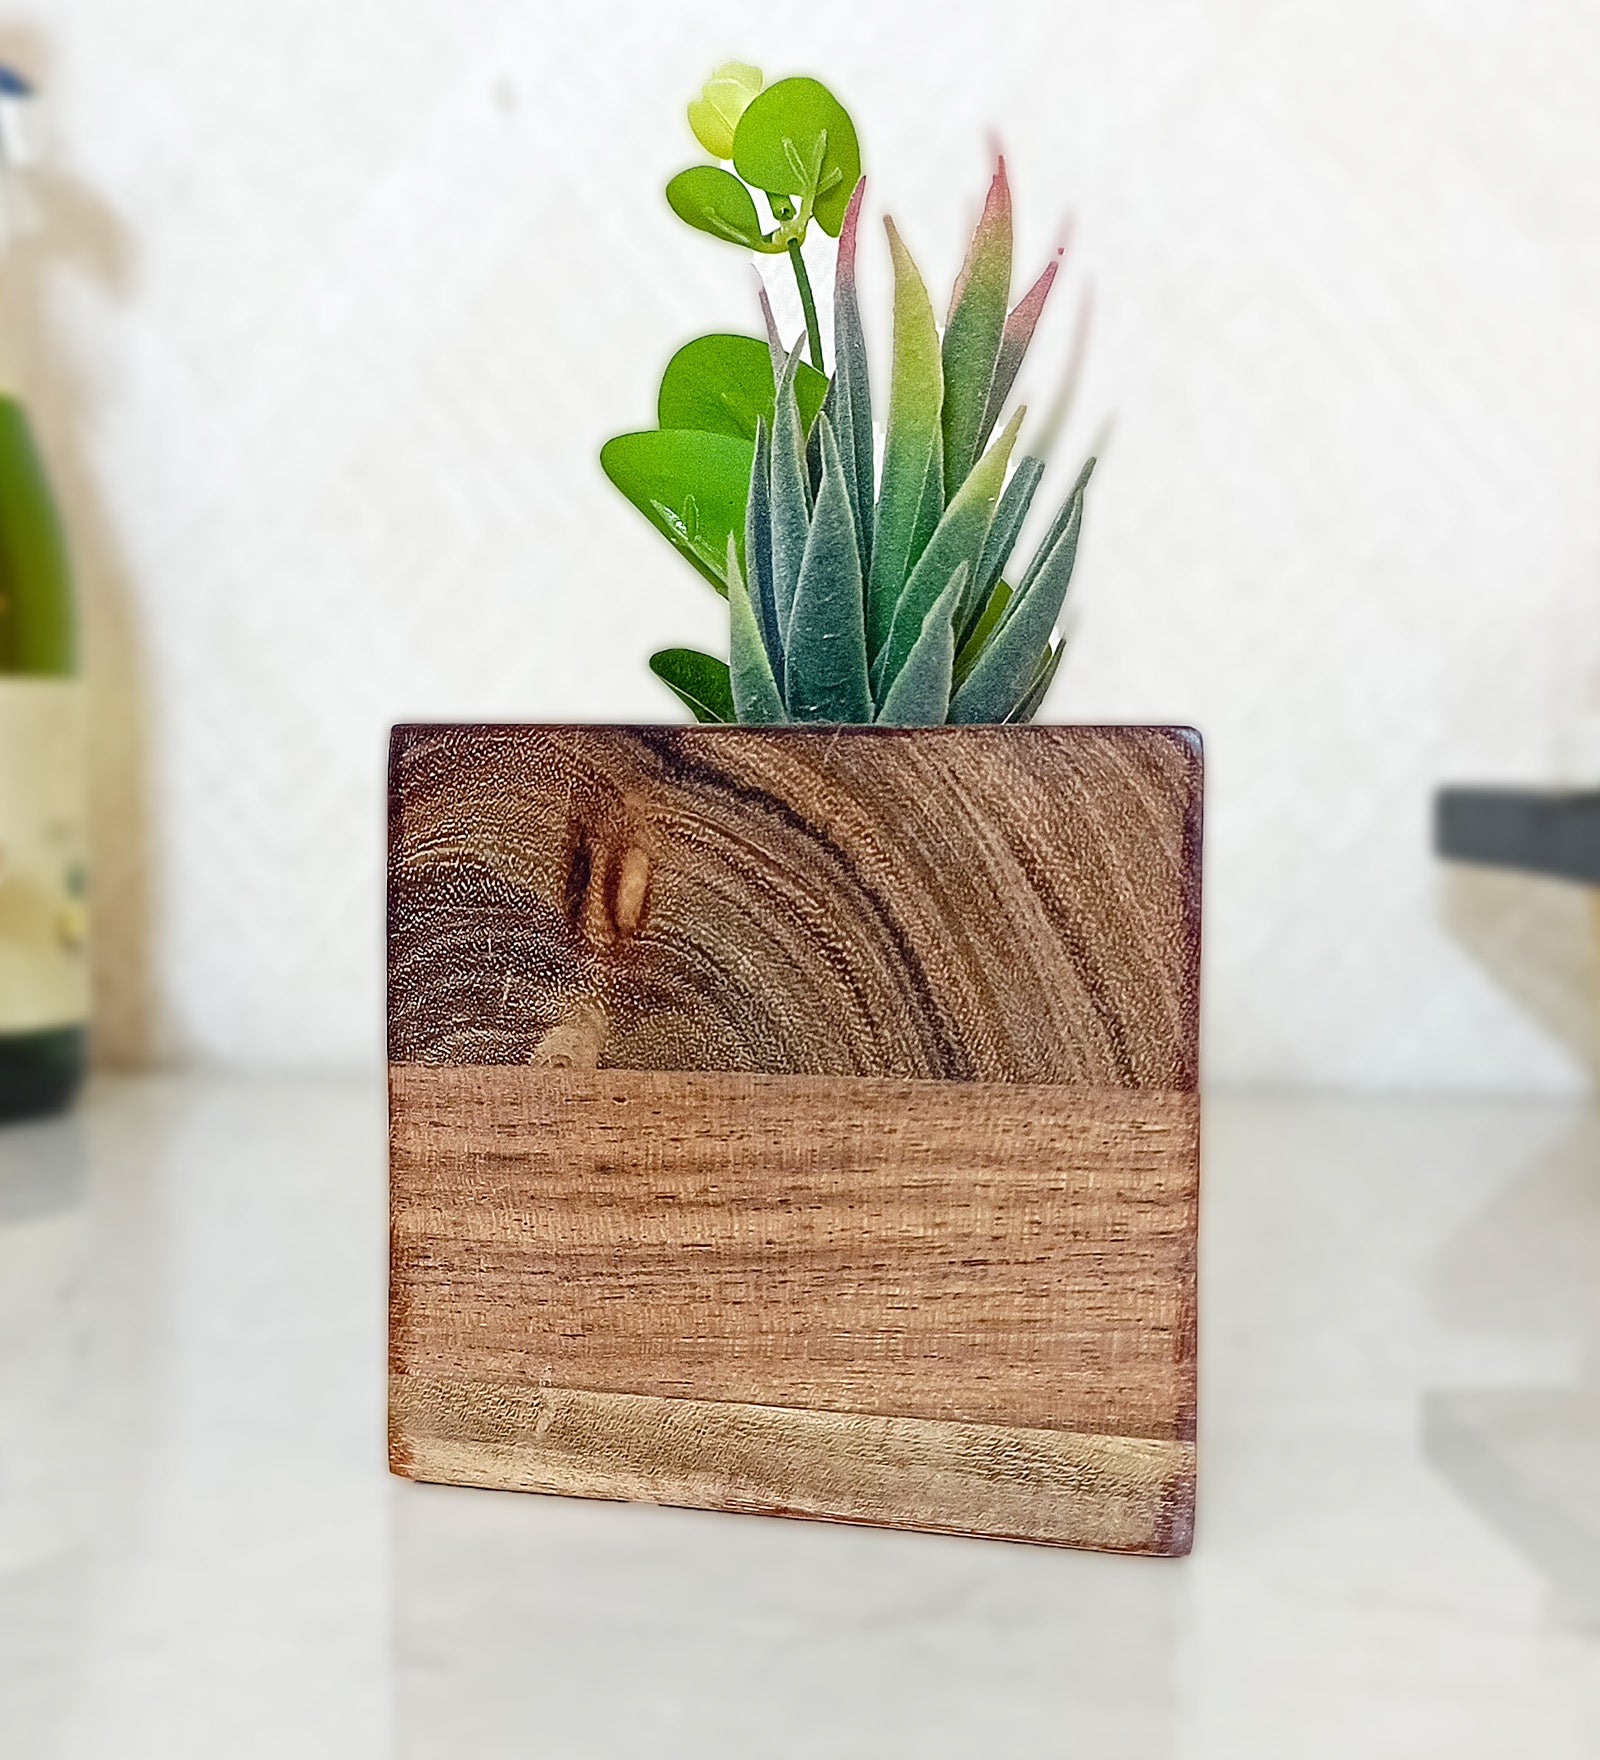 Triangle Wooden Vase with Artificial Succulent Plant